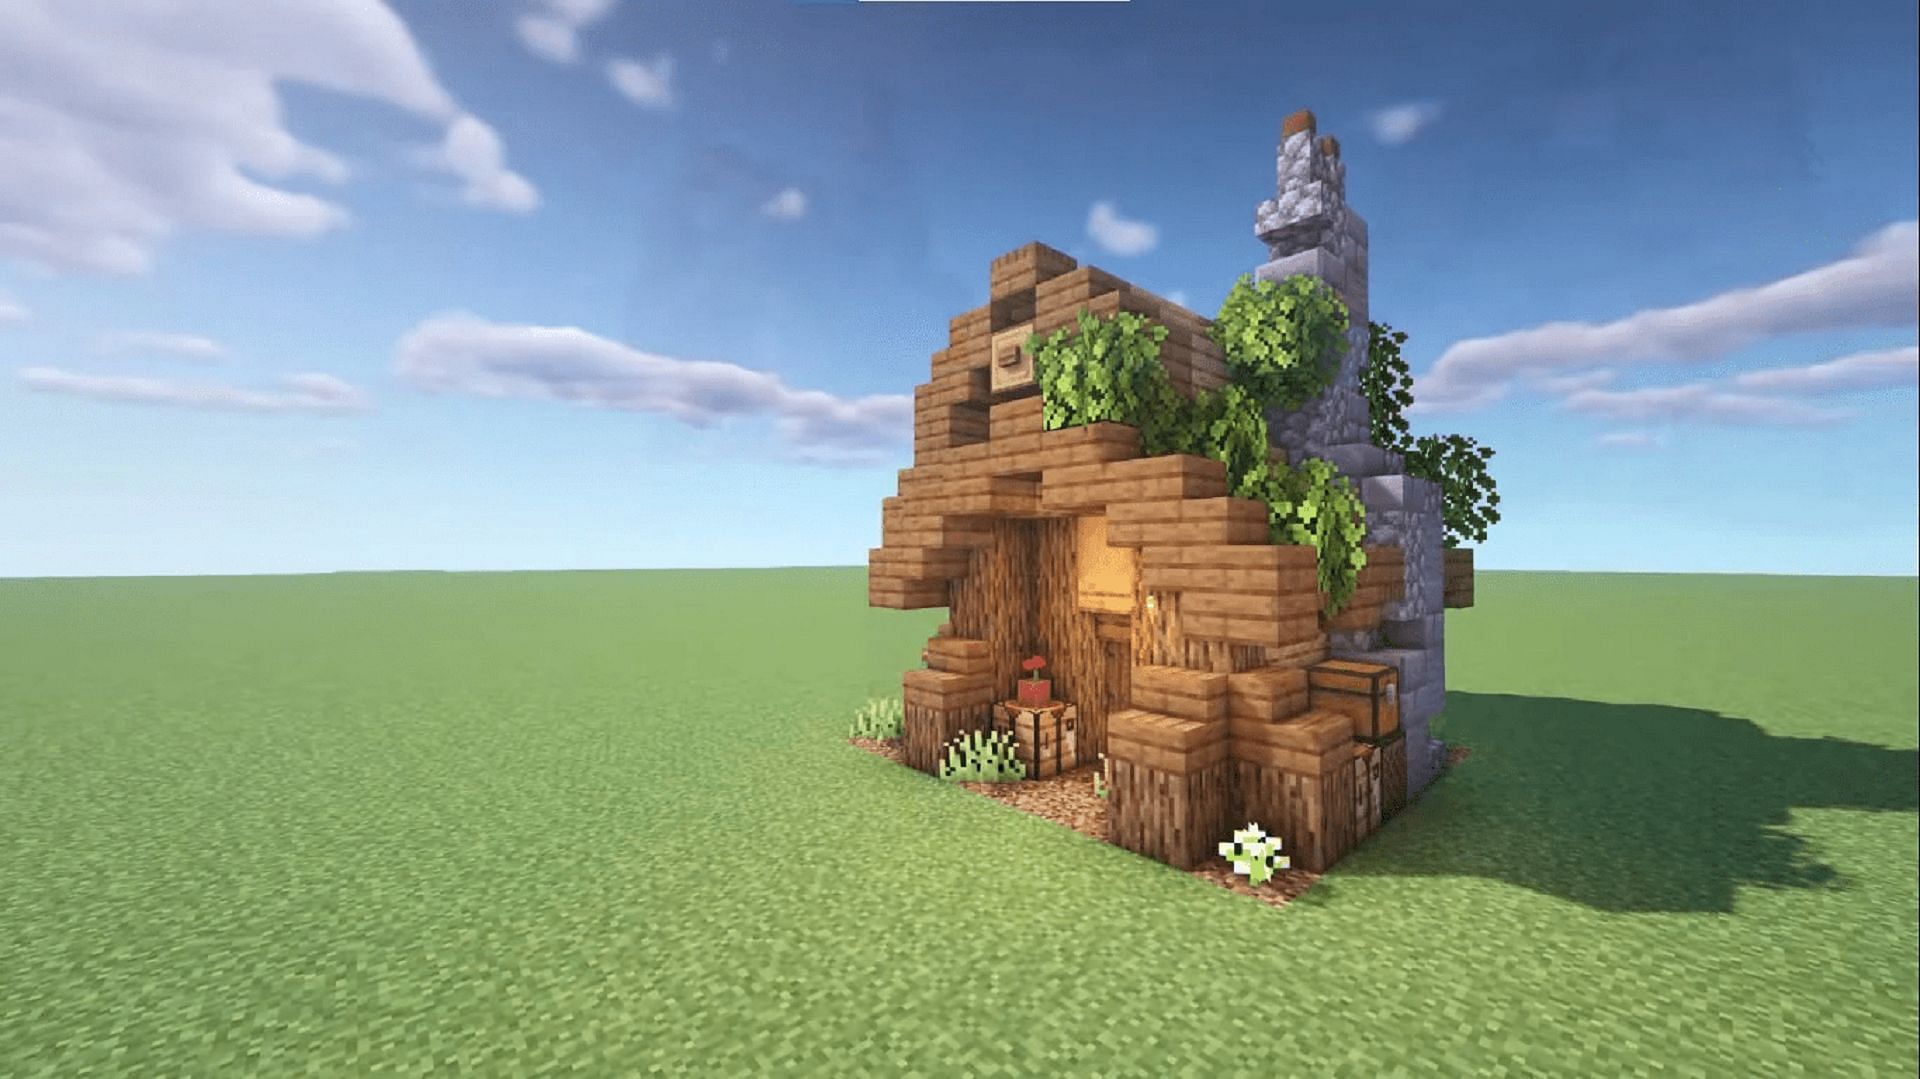 This house is compact yet looks great (Image via TheMythicalSausage/YouTube)